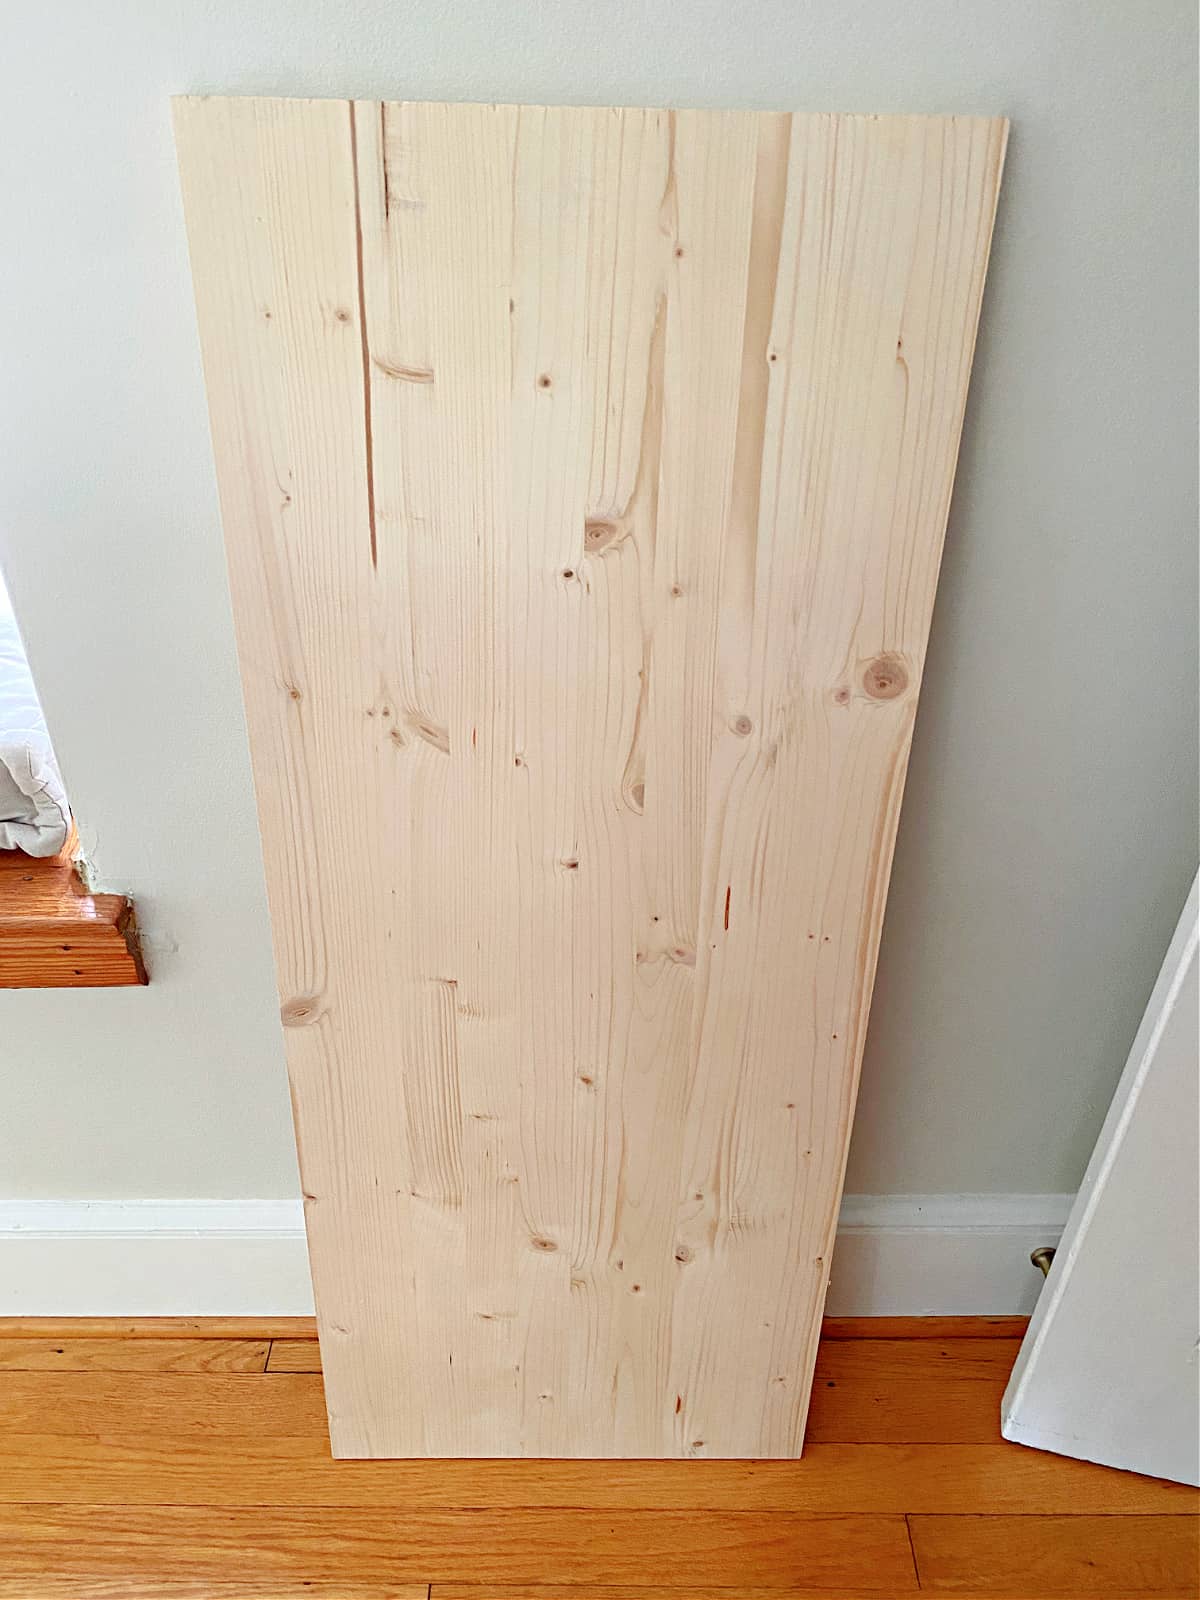 pine board leaning against wall